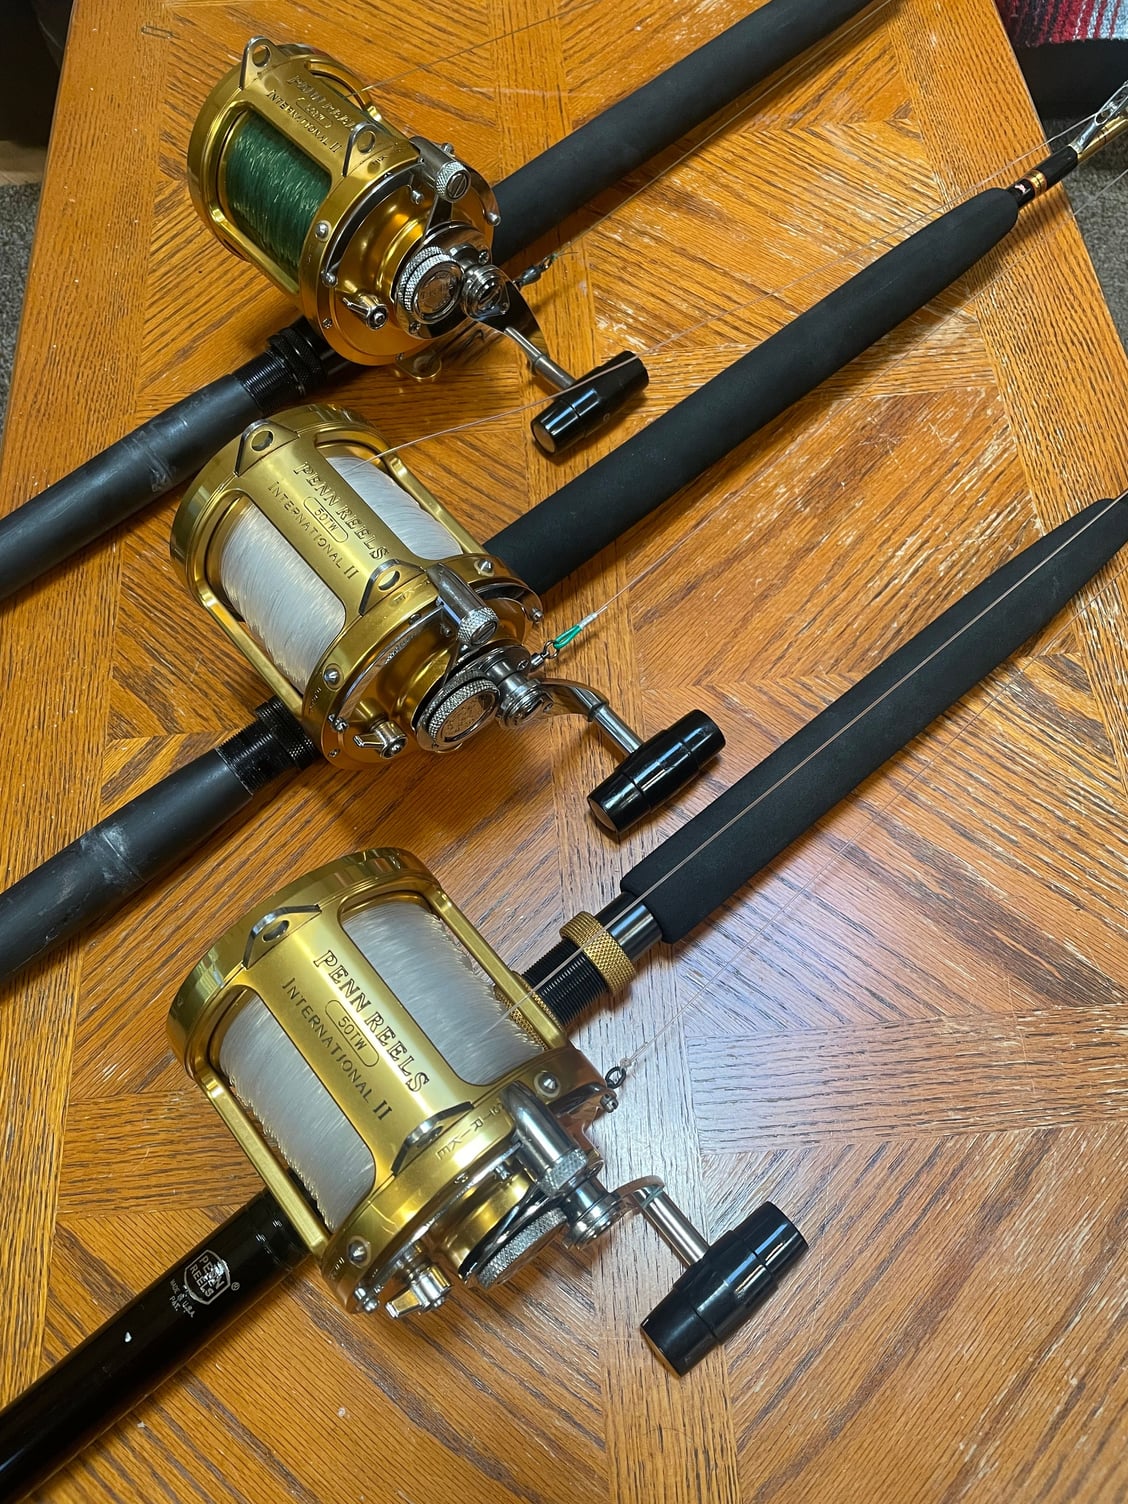 3 Penn international 2 50tw & rod combos. - The Hull Truth - Boating and  Fishing Forum